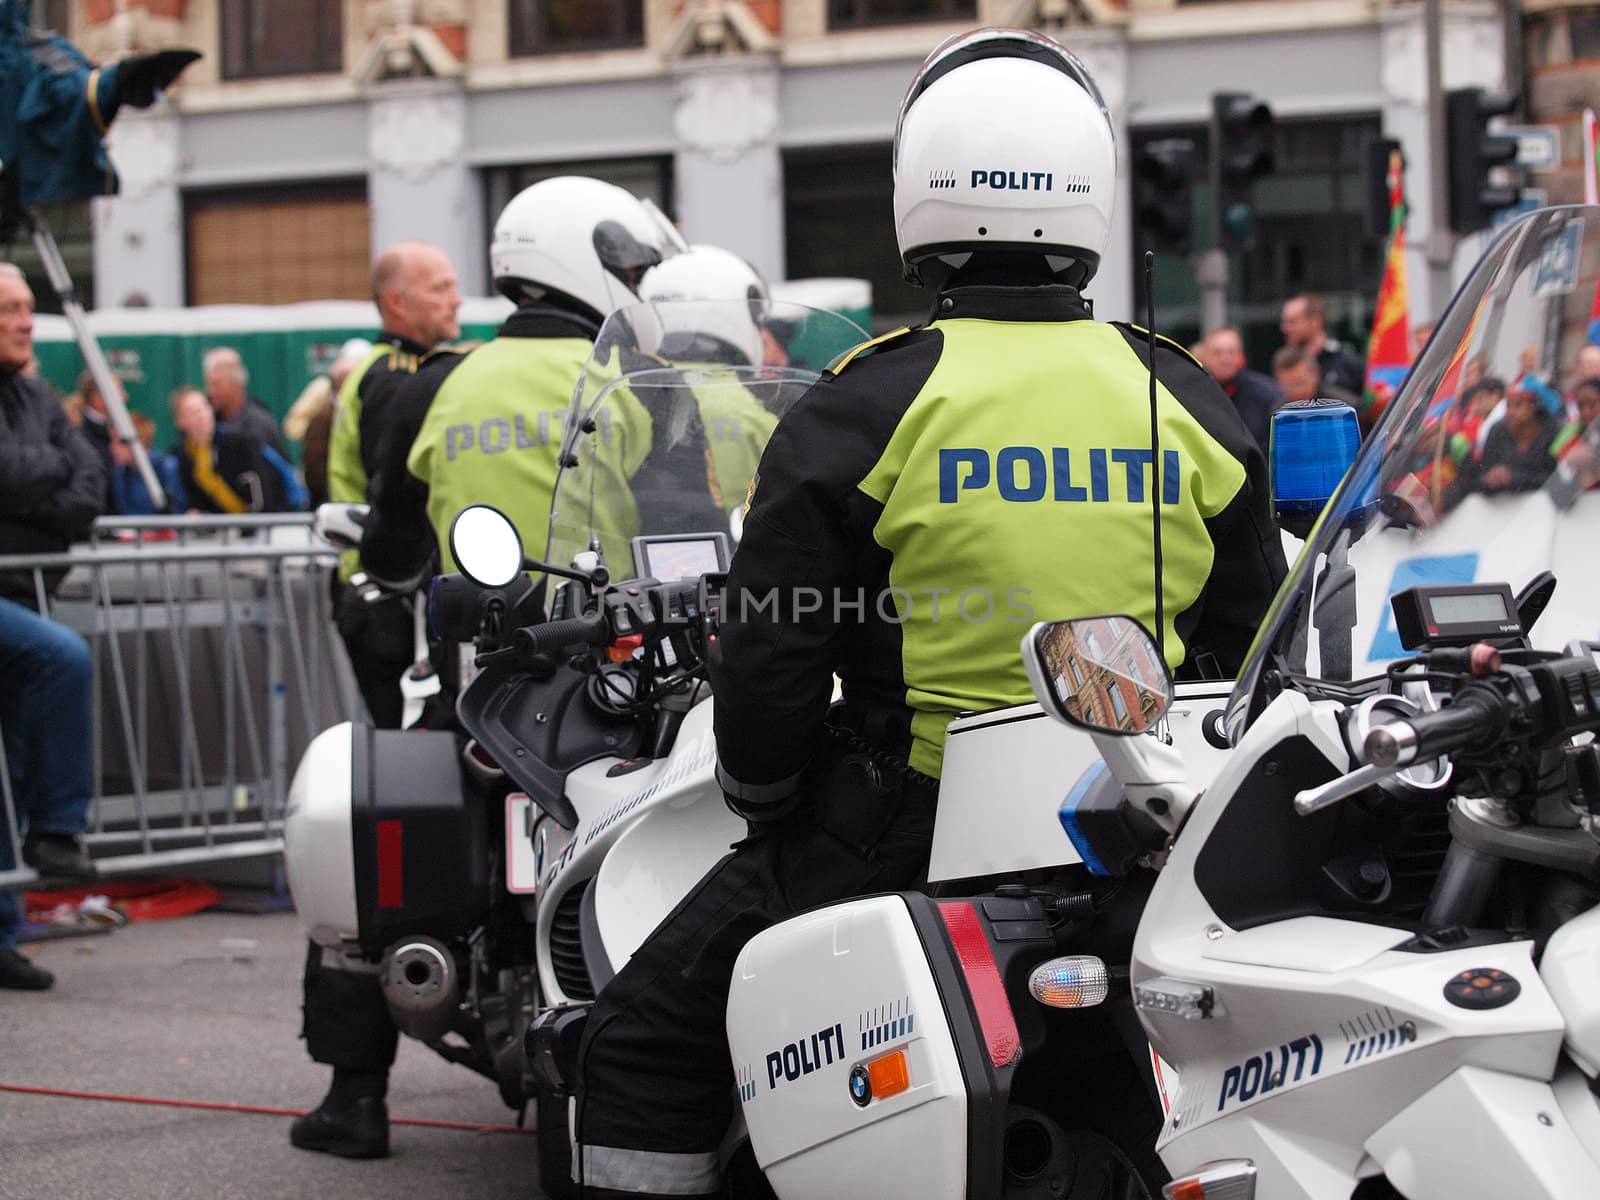 danish policemen on motorcycle by Ric510